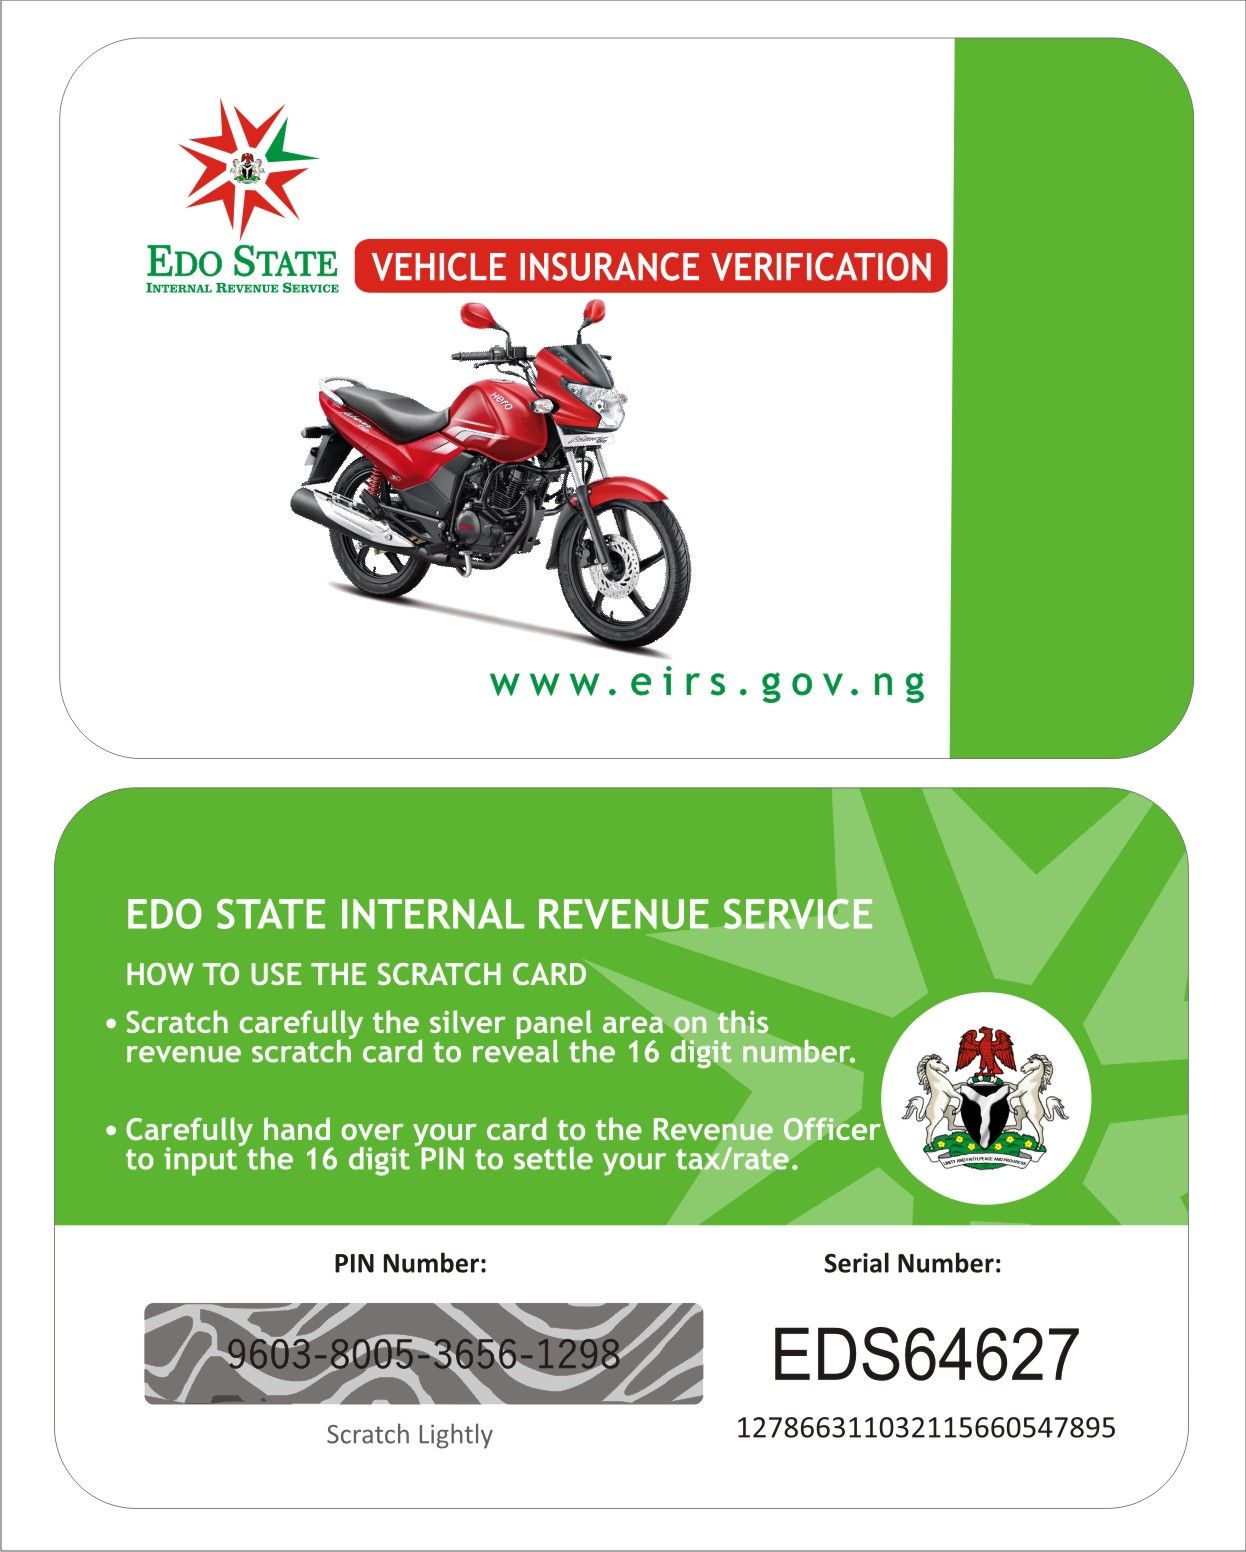 CALL CHINEDU ON 09022536974 TO PRINT E-BUSINESS / PAYMENT SCRATCH CARDS